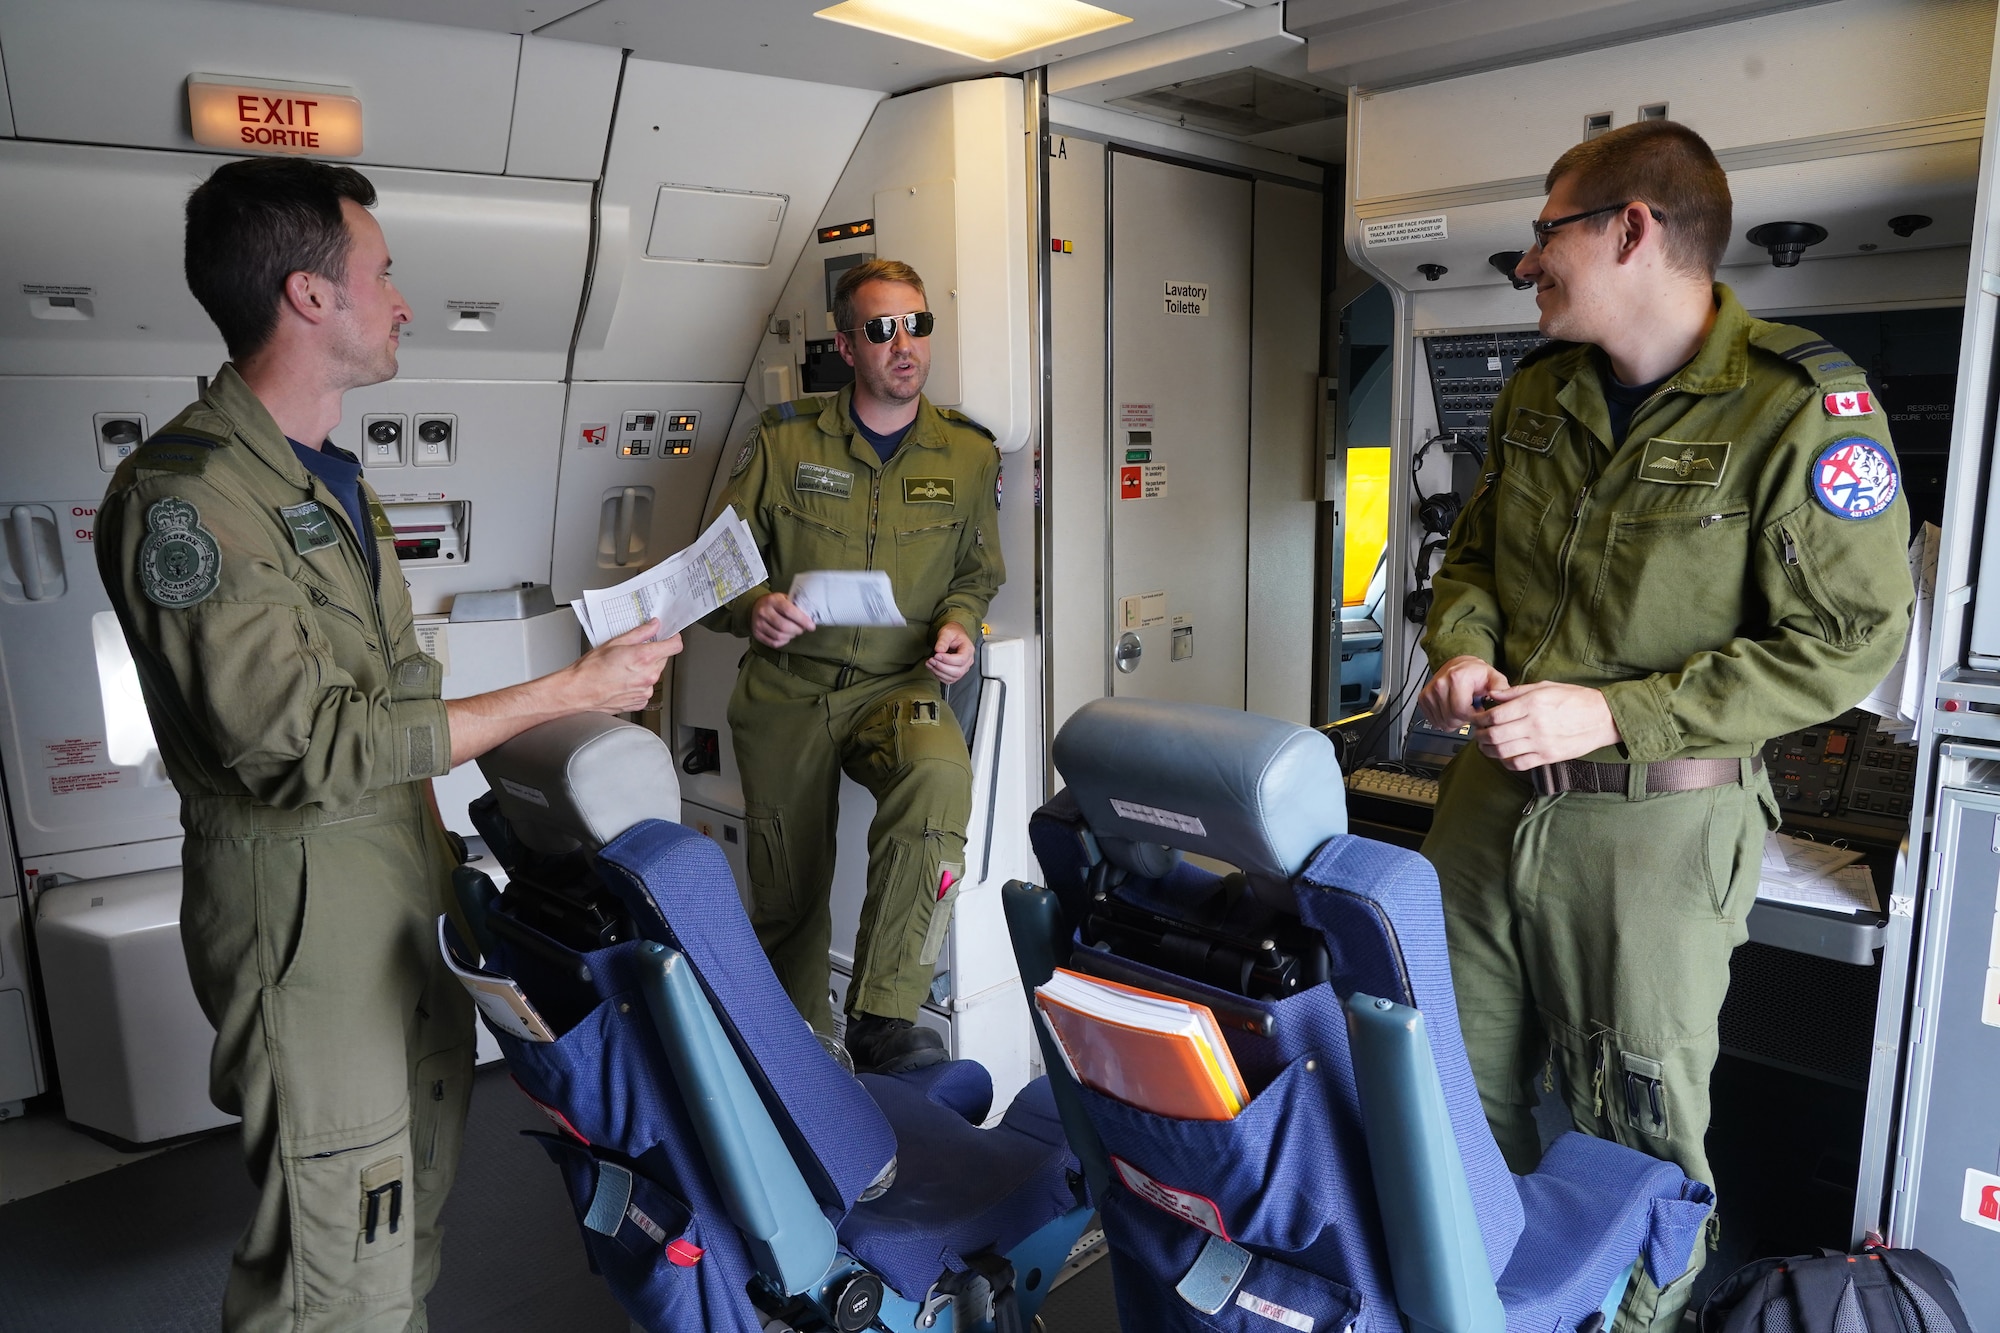 Royal Canadian Air Force captains Russ Baker, left, Andrew Williams, and Adam Rutledge, all assigned to the 437th Transport Squadron based out of Canadian Forces Base Trenton, Canada, conduct a pre-flight briefing aboard their CC-150 Polaris refueling tanker before refueling operations in training airspace over Alaska during the Red Flag-Alaska 19-3 exercise, Aug. 15, 2019. Red Flag-Alaska, a series of Pacific Air Forces commander-directed field training exercises for U.S. forces, provides joint offensive counter-air, interdiction, close air support, and large force employment training in a simulated combat environment.